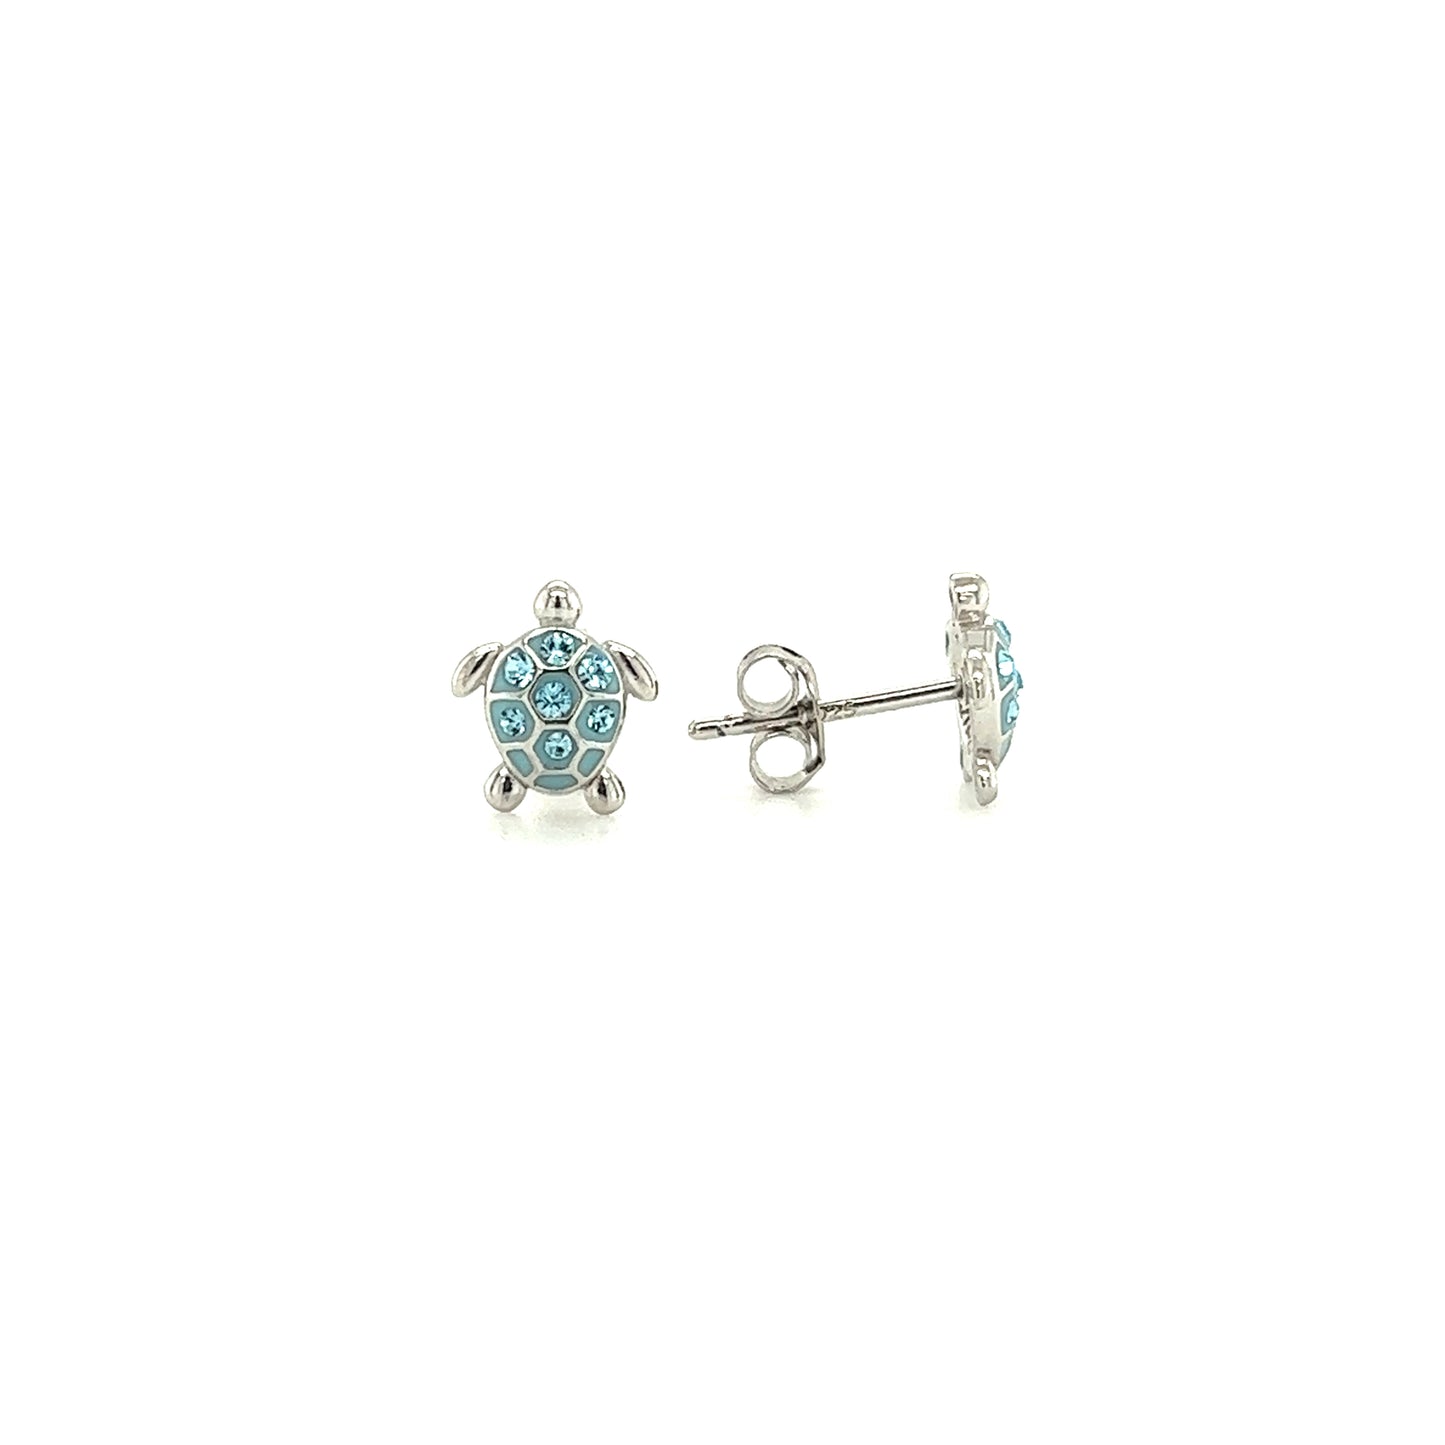 Sea Turtle Stud Earrings with Aqua Crystals in Sterling Silver Front and Side View